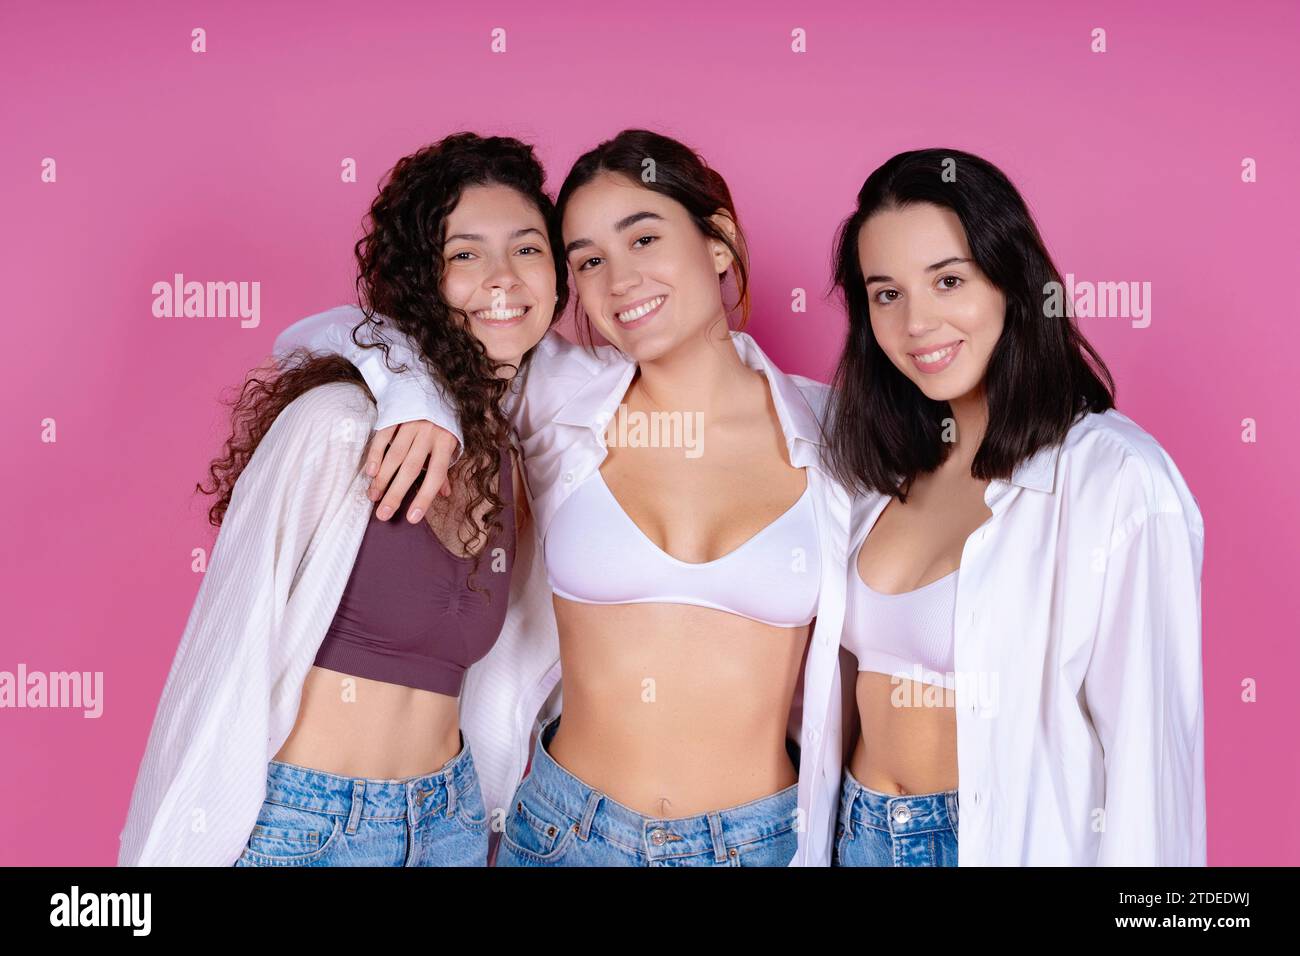 Four young women in casual attire posing against a pink background with confidence and style Stock Photo